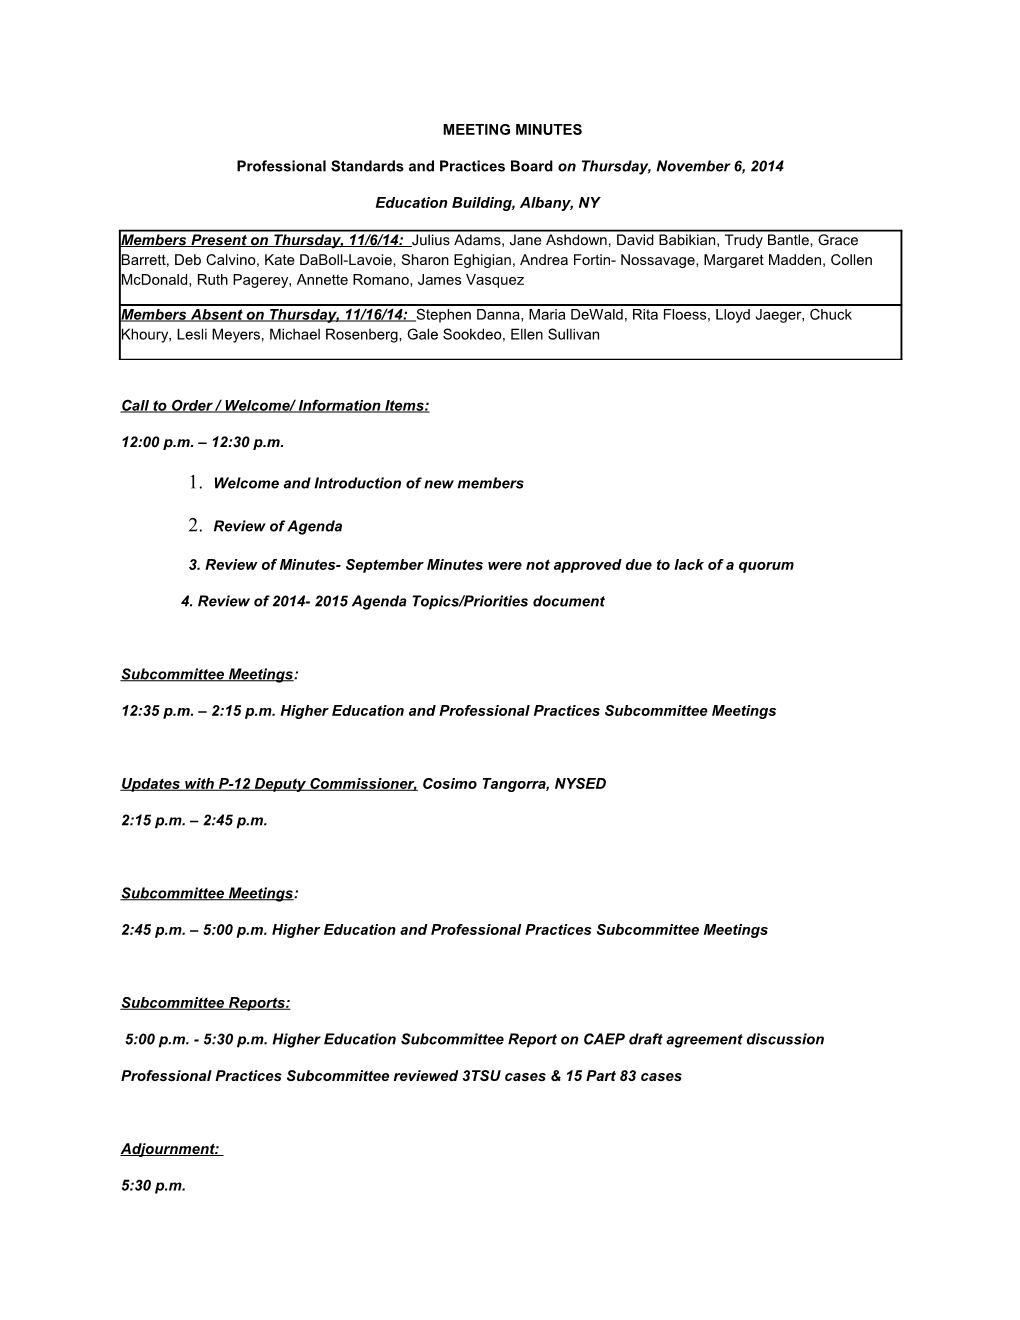 Professional Standards and Practices Board on Thursday, November 6, 2014